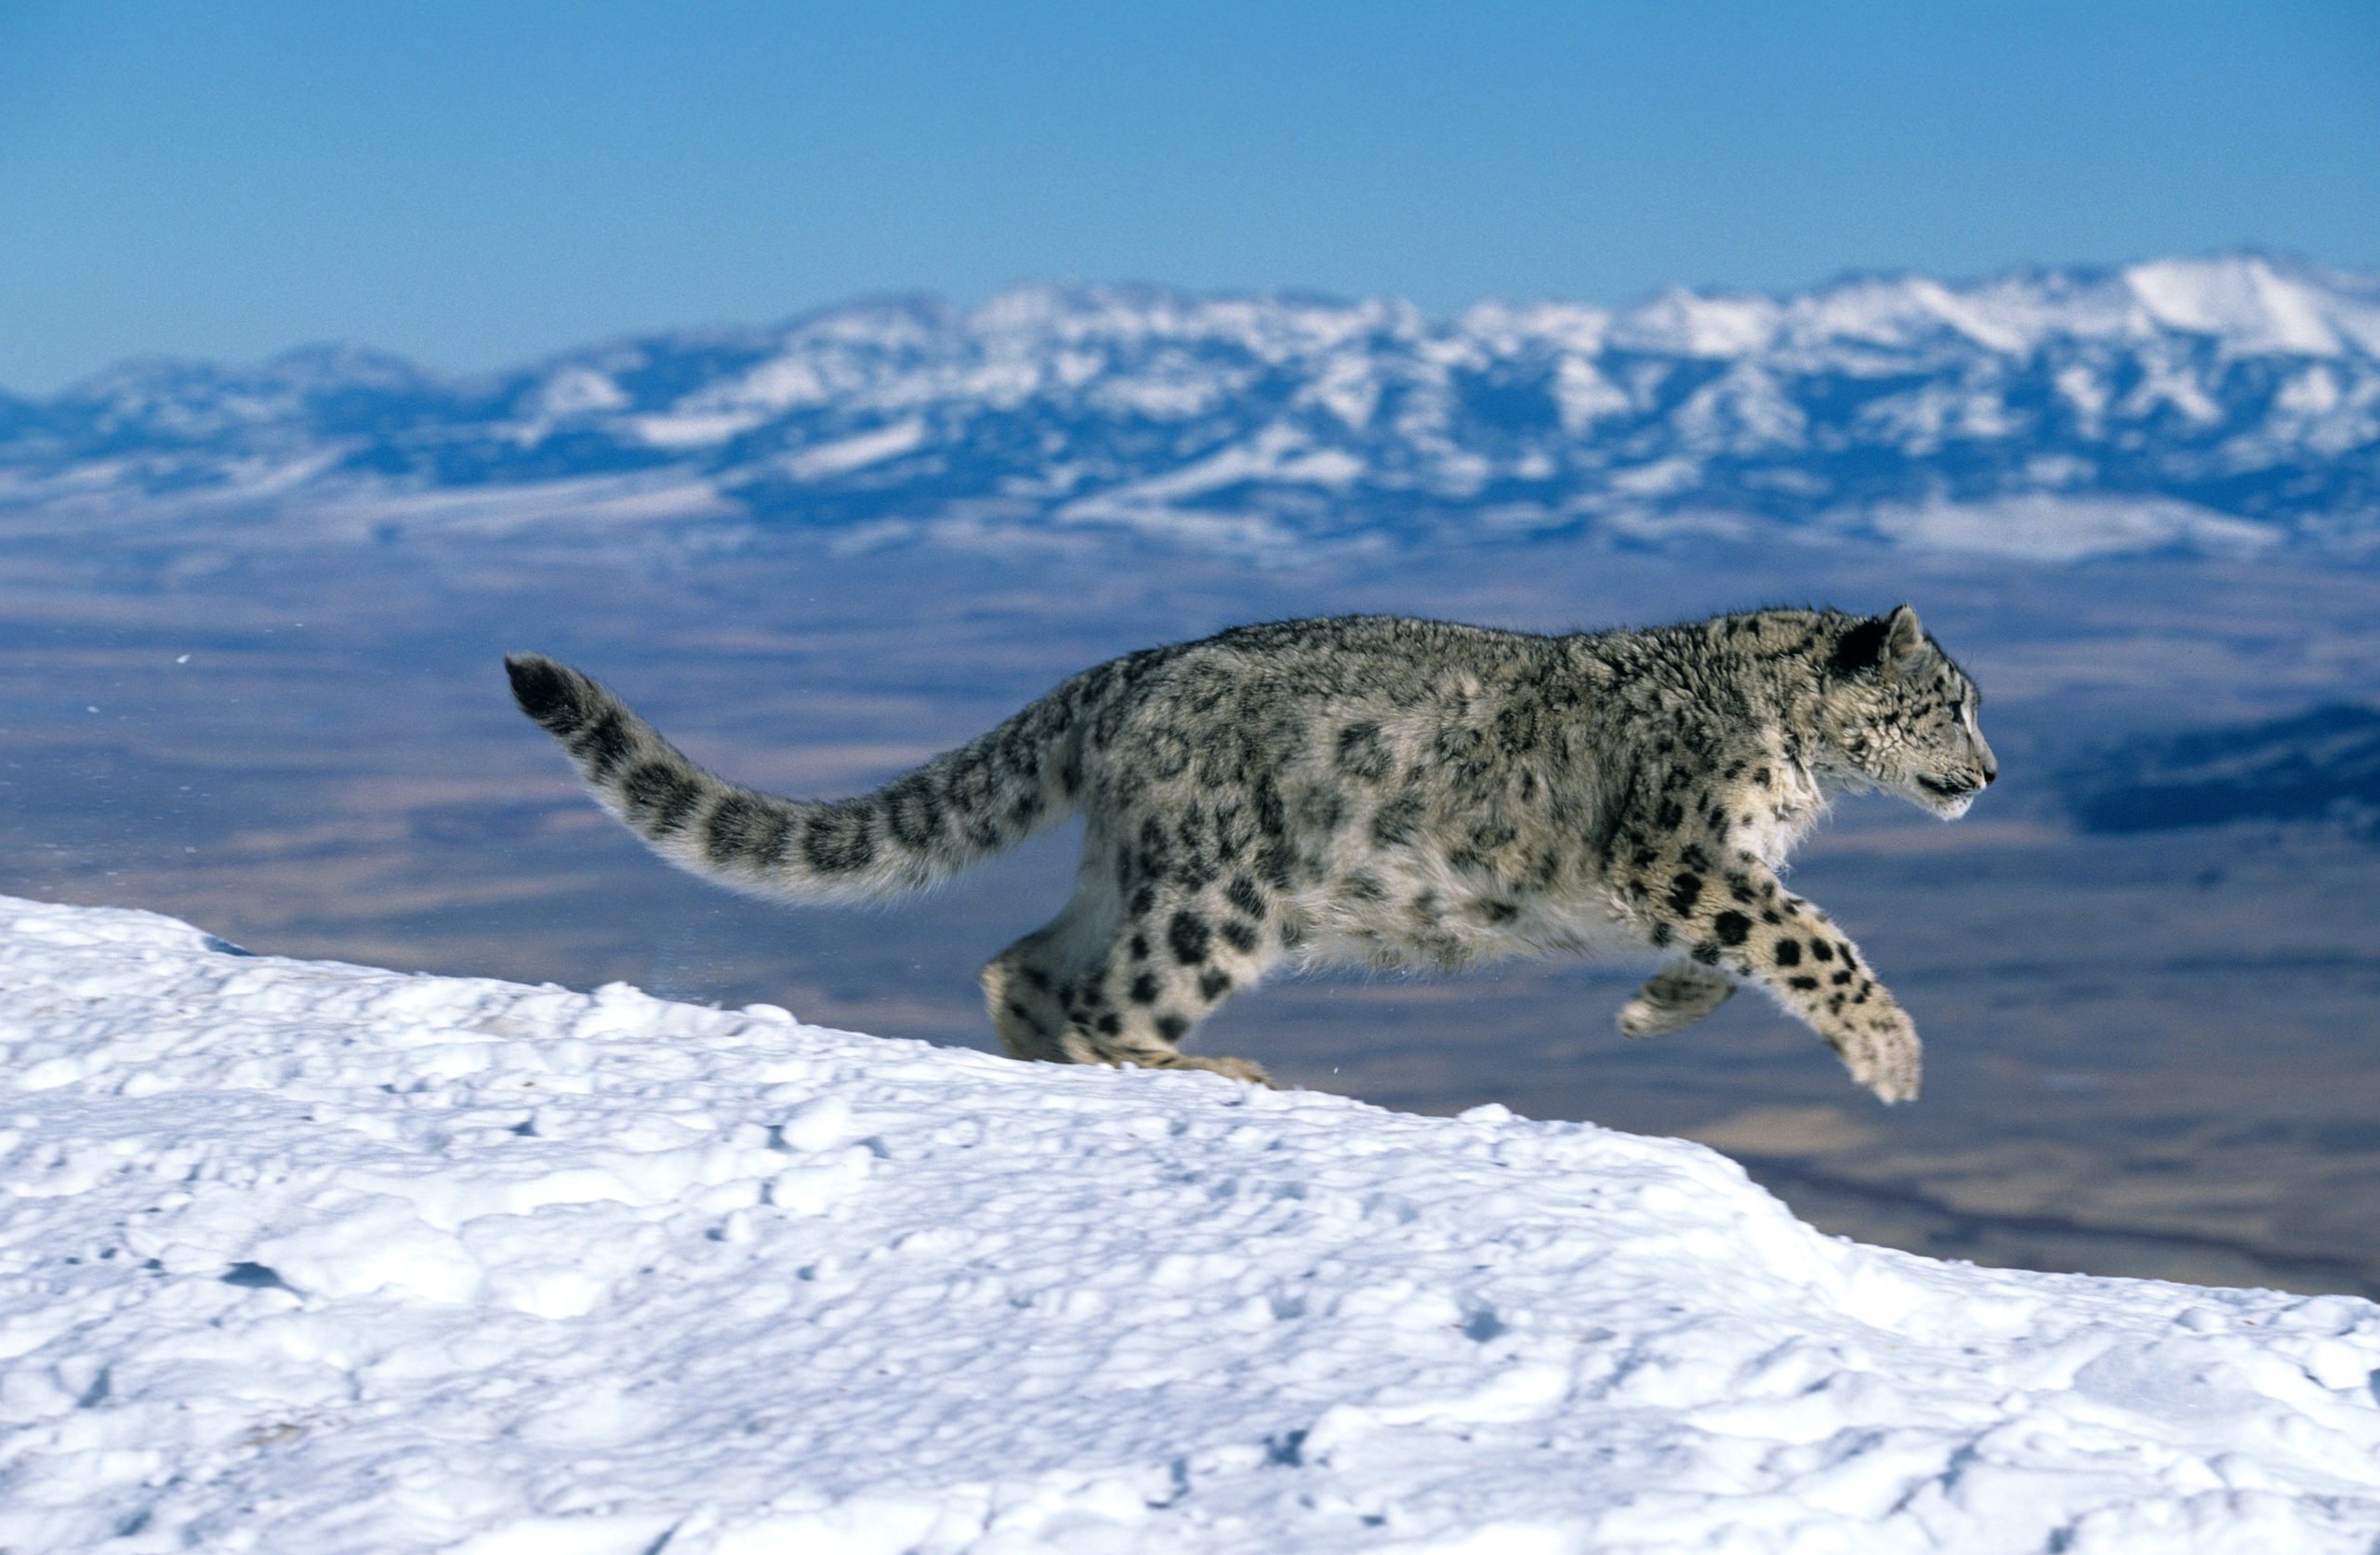 Snow leopards in the mountains of Asia face a multitude of threats, including conflict and retaliatory killing, trade in their body parts and climate change (Image: Arco / G. Lacz / Alamy)